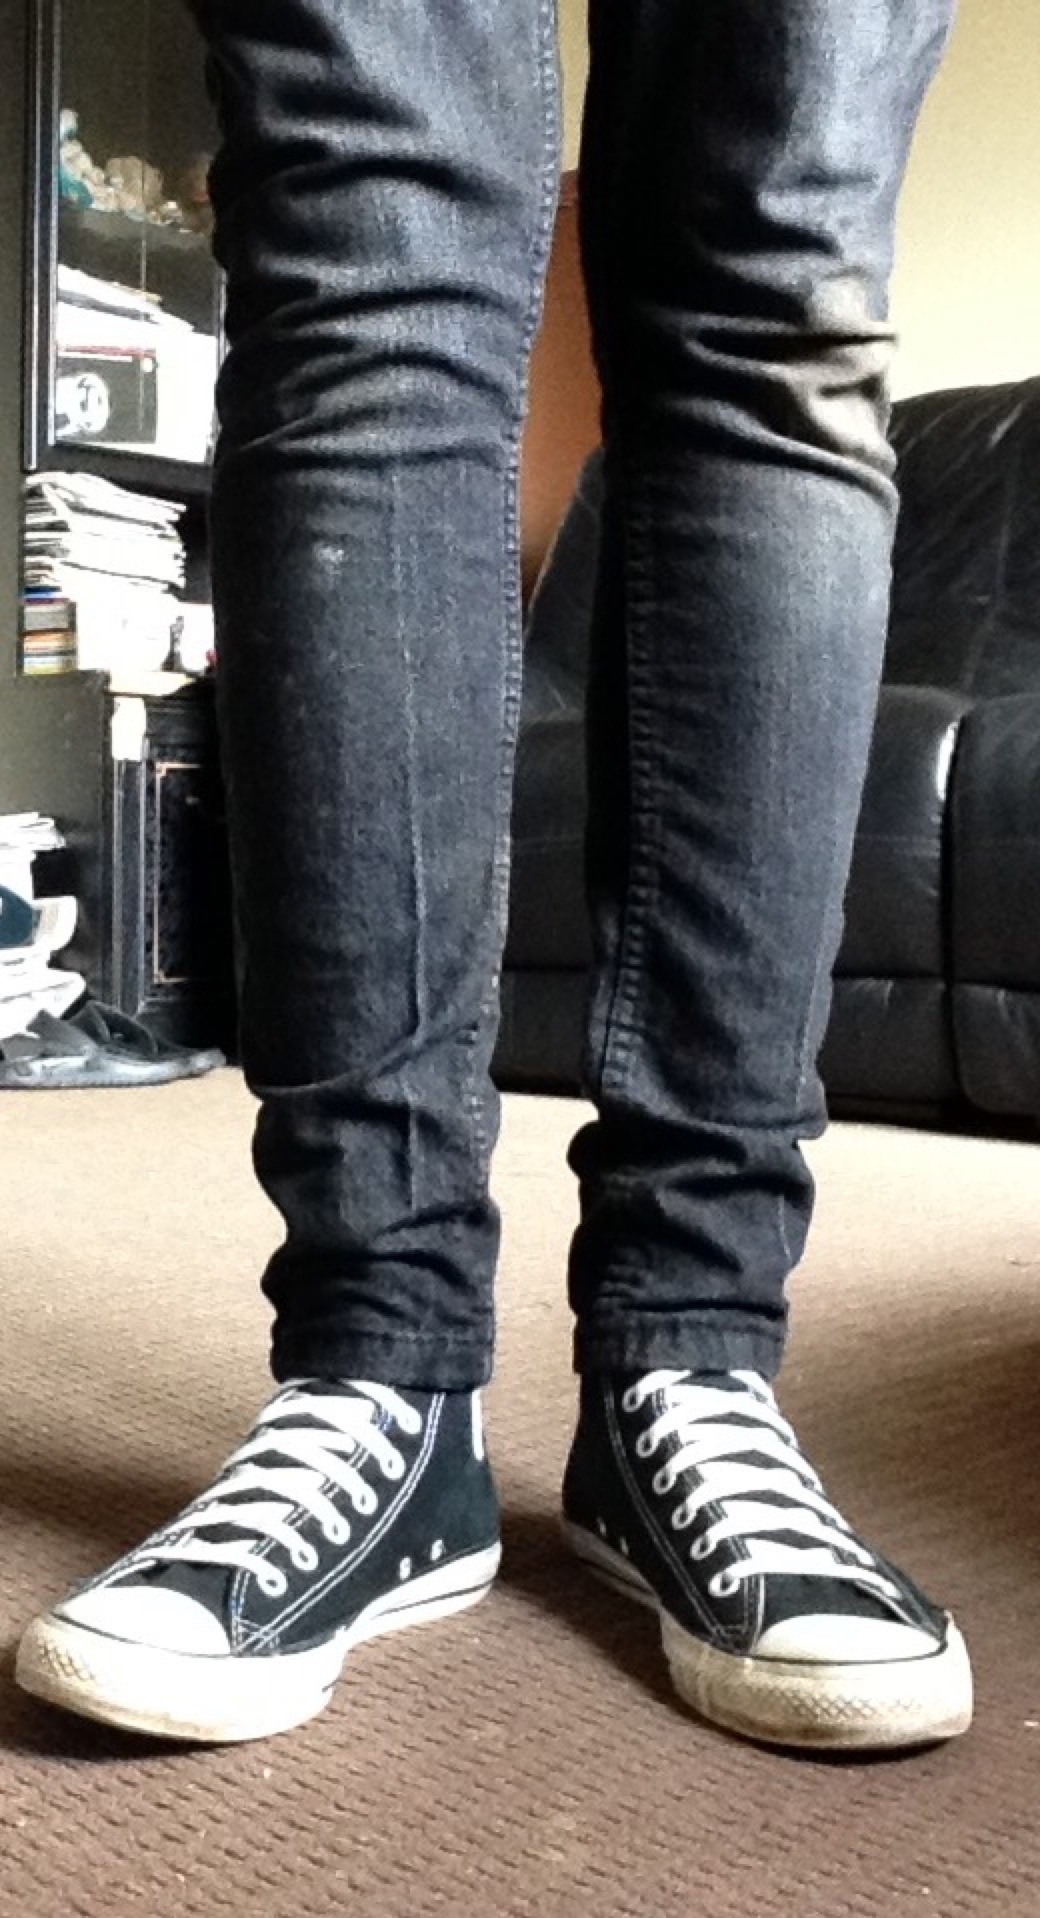 WHAT THE BLOG SAYS MAX... WE FOLLOW — Black converse with black skinny jeans go so